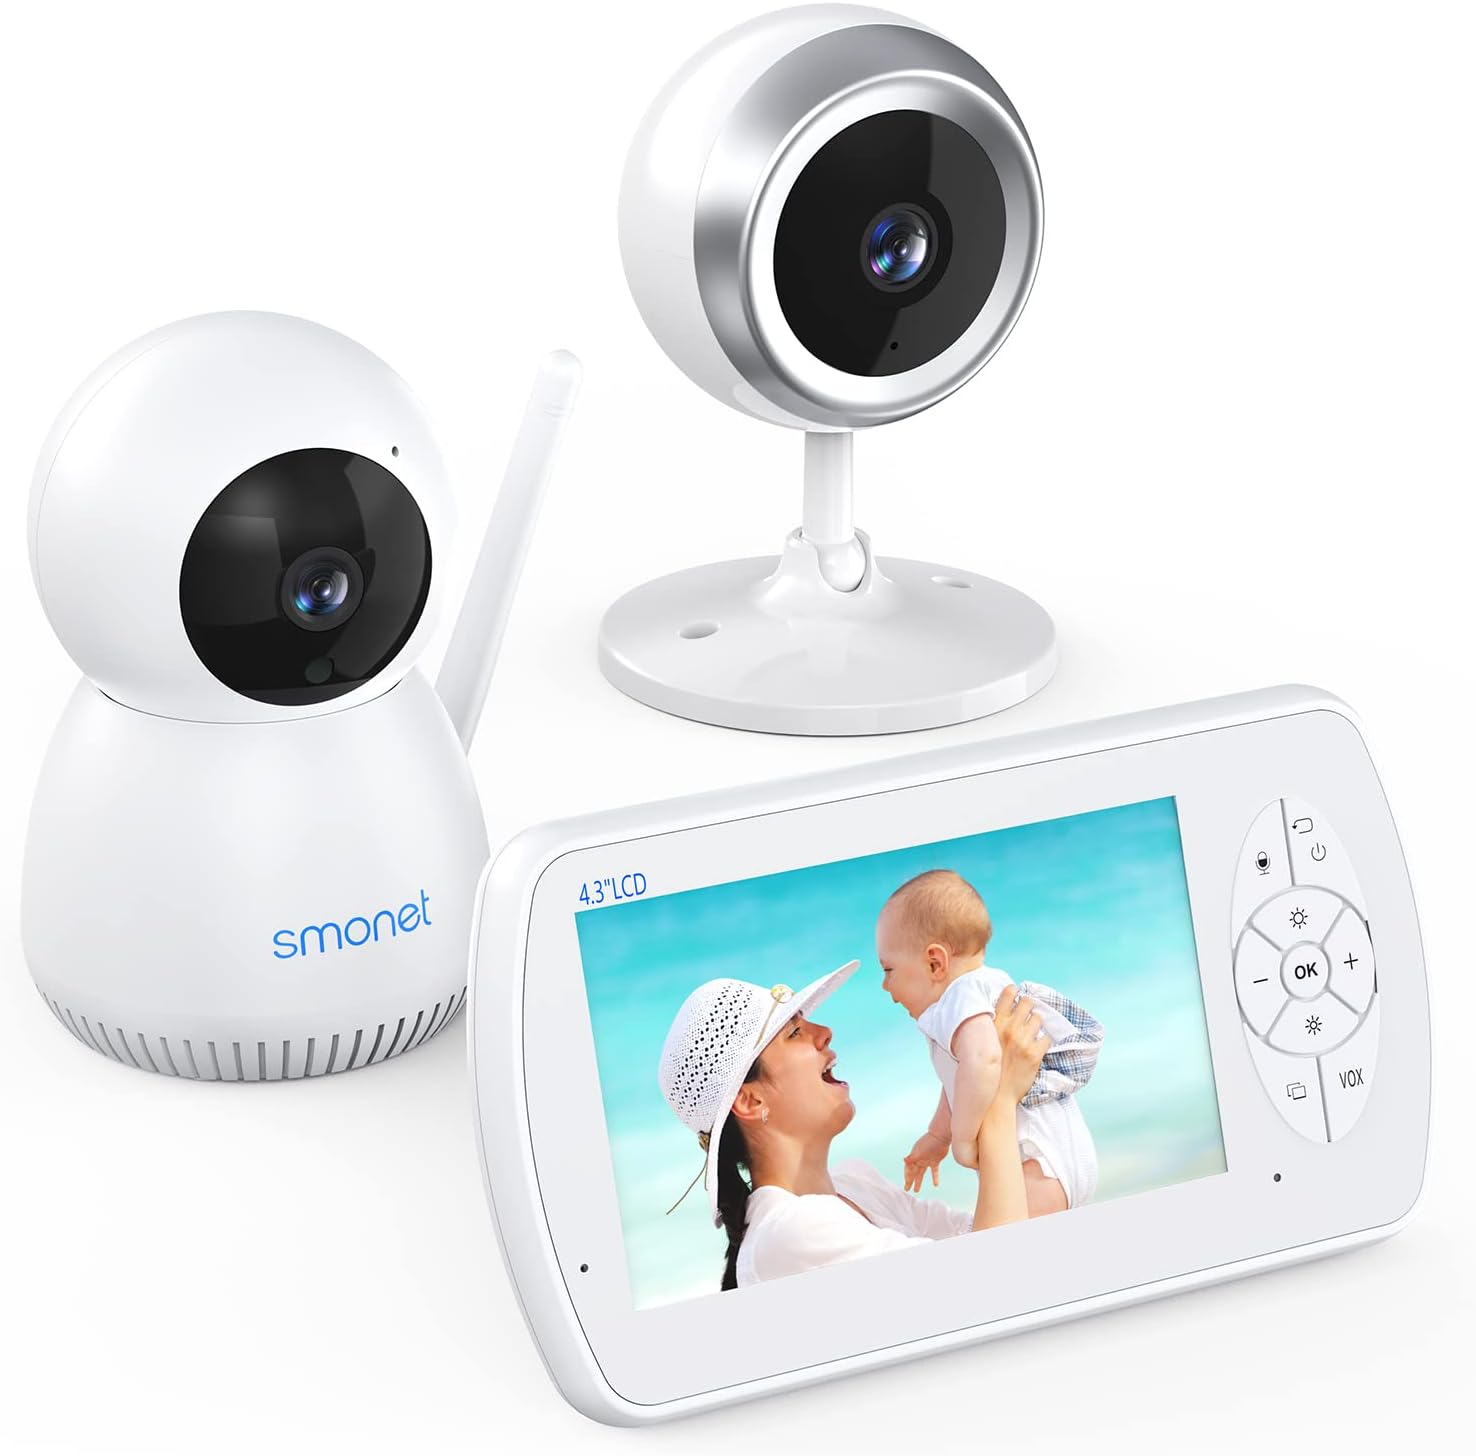 SMONET 1080P Baby Monitor丨With Video and Audio